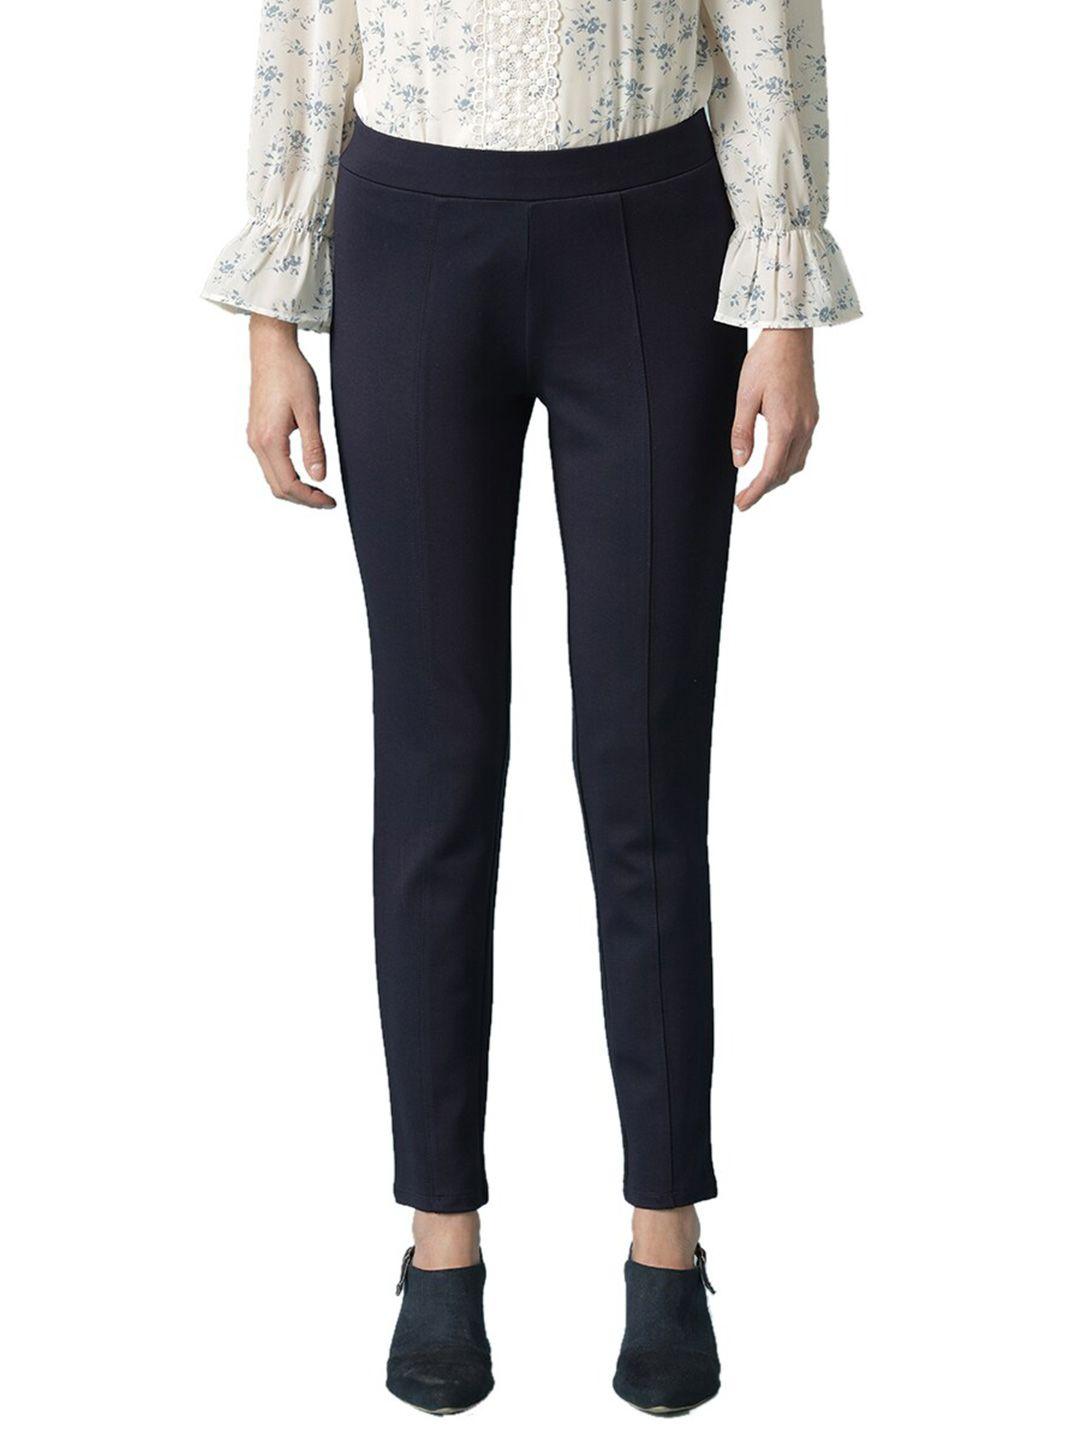 gipsy women navy blue solid ankle-length jeggings